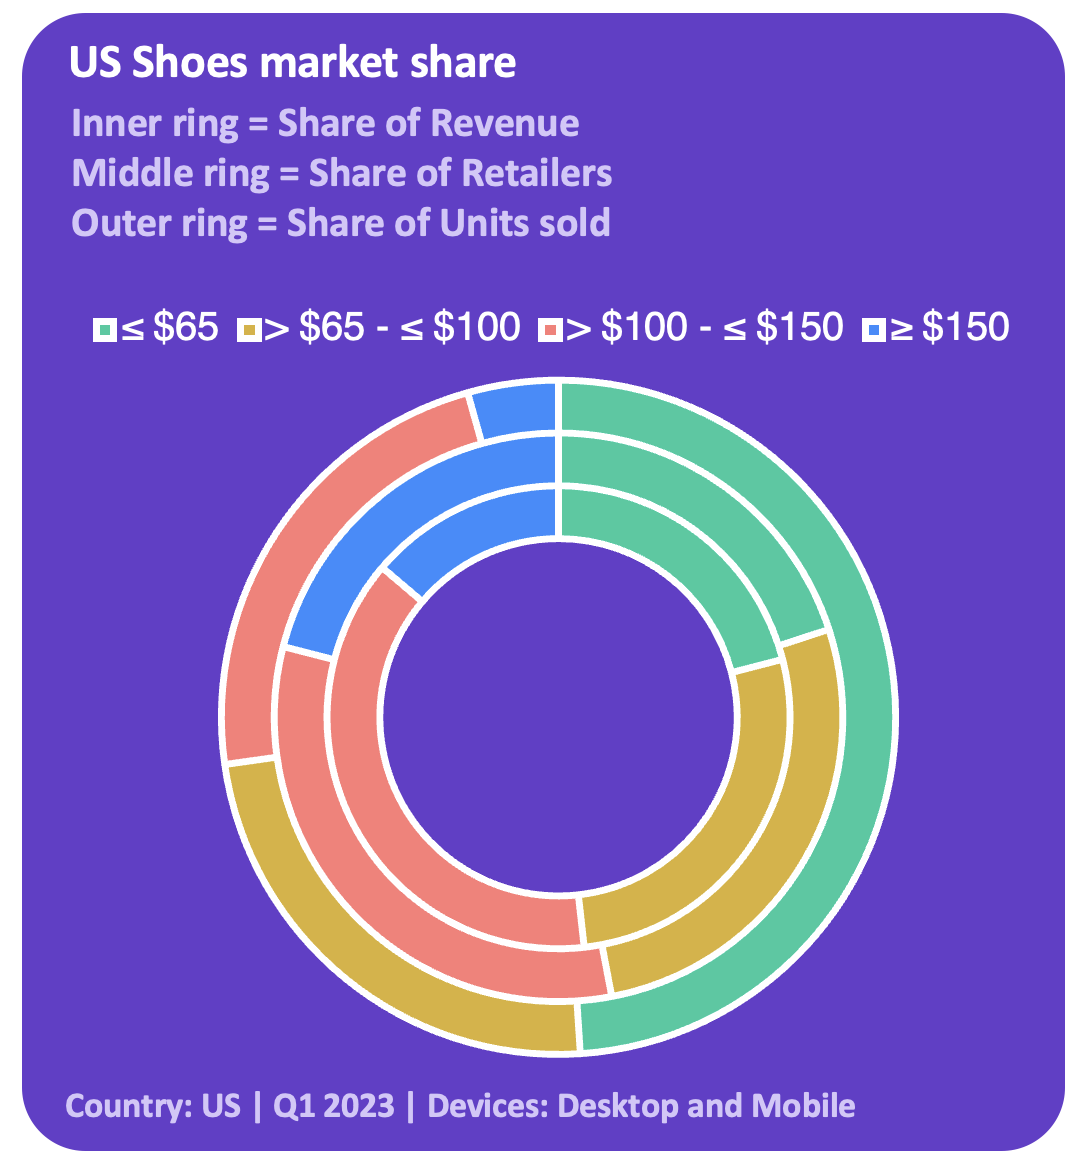 US Shoes market share, by price